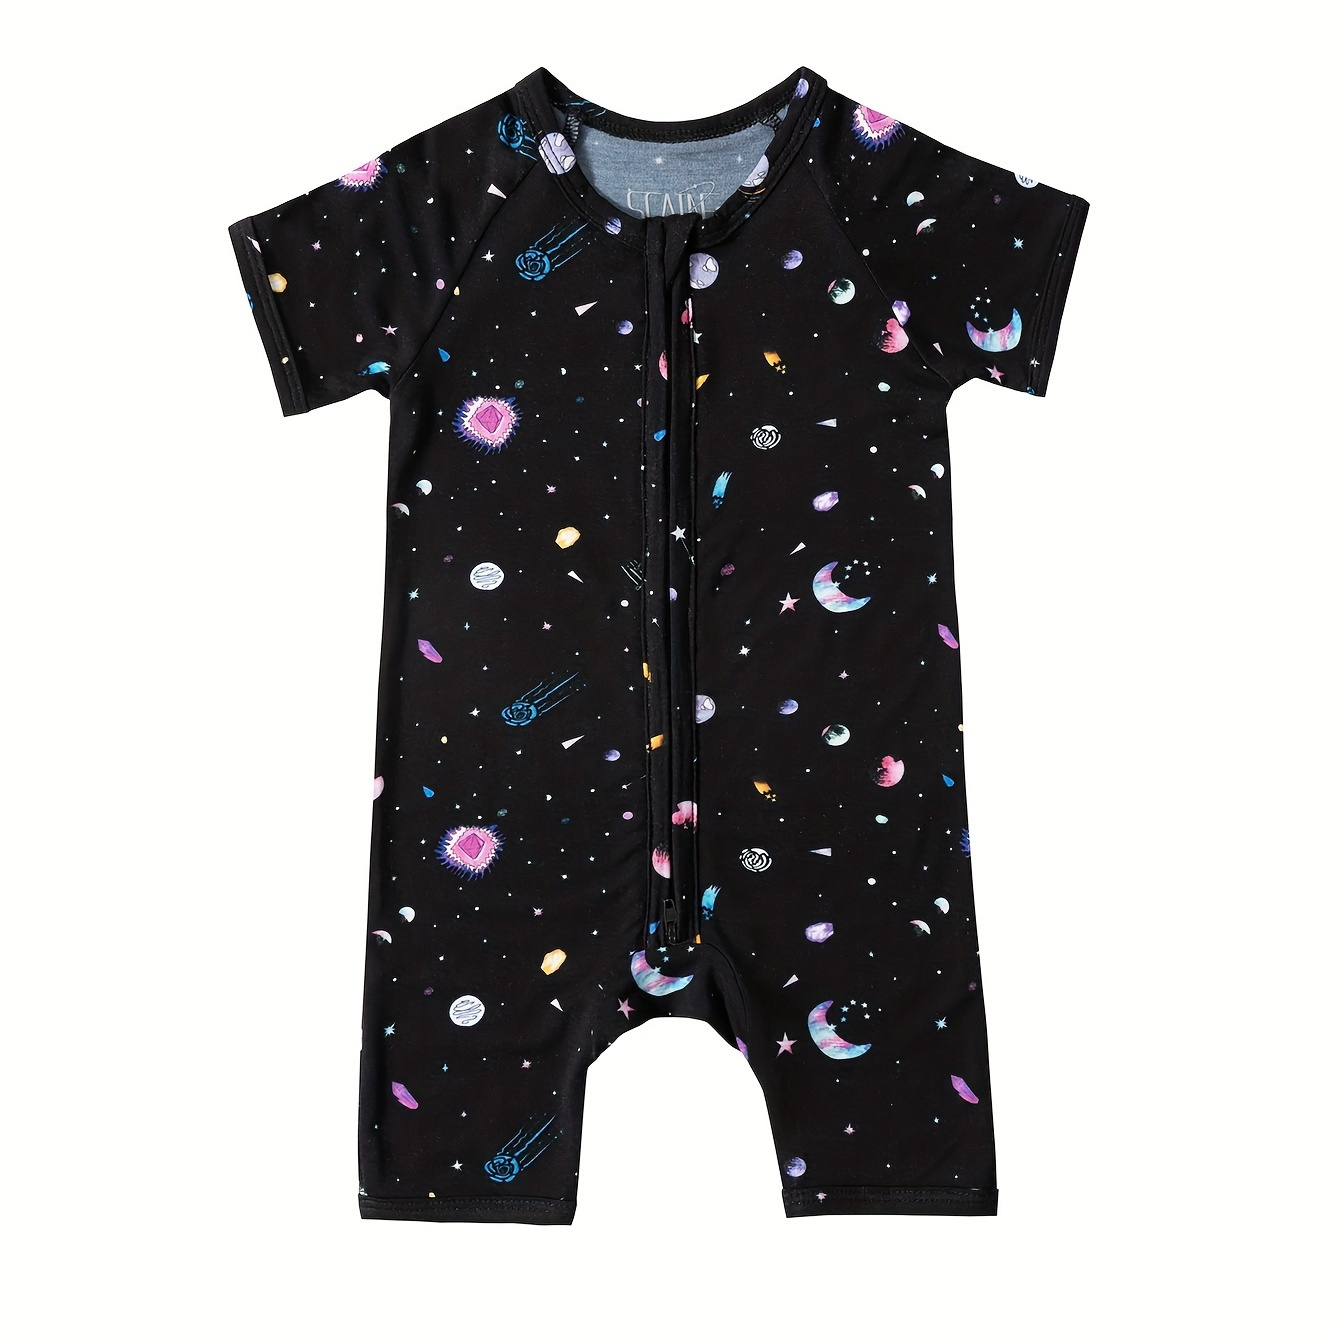 

Infant Unisex Short Sleeve Romper, Bamboo Fiber Fabric, Spring/summer Comfort, Cute Galaxy Print, Baby One-piece Outfit With Zipper